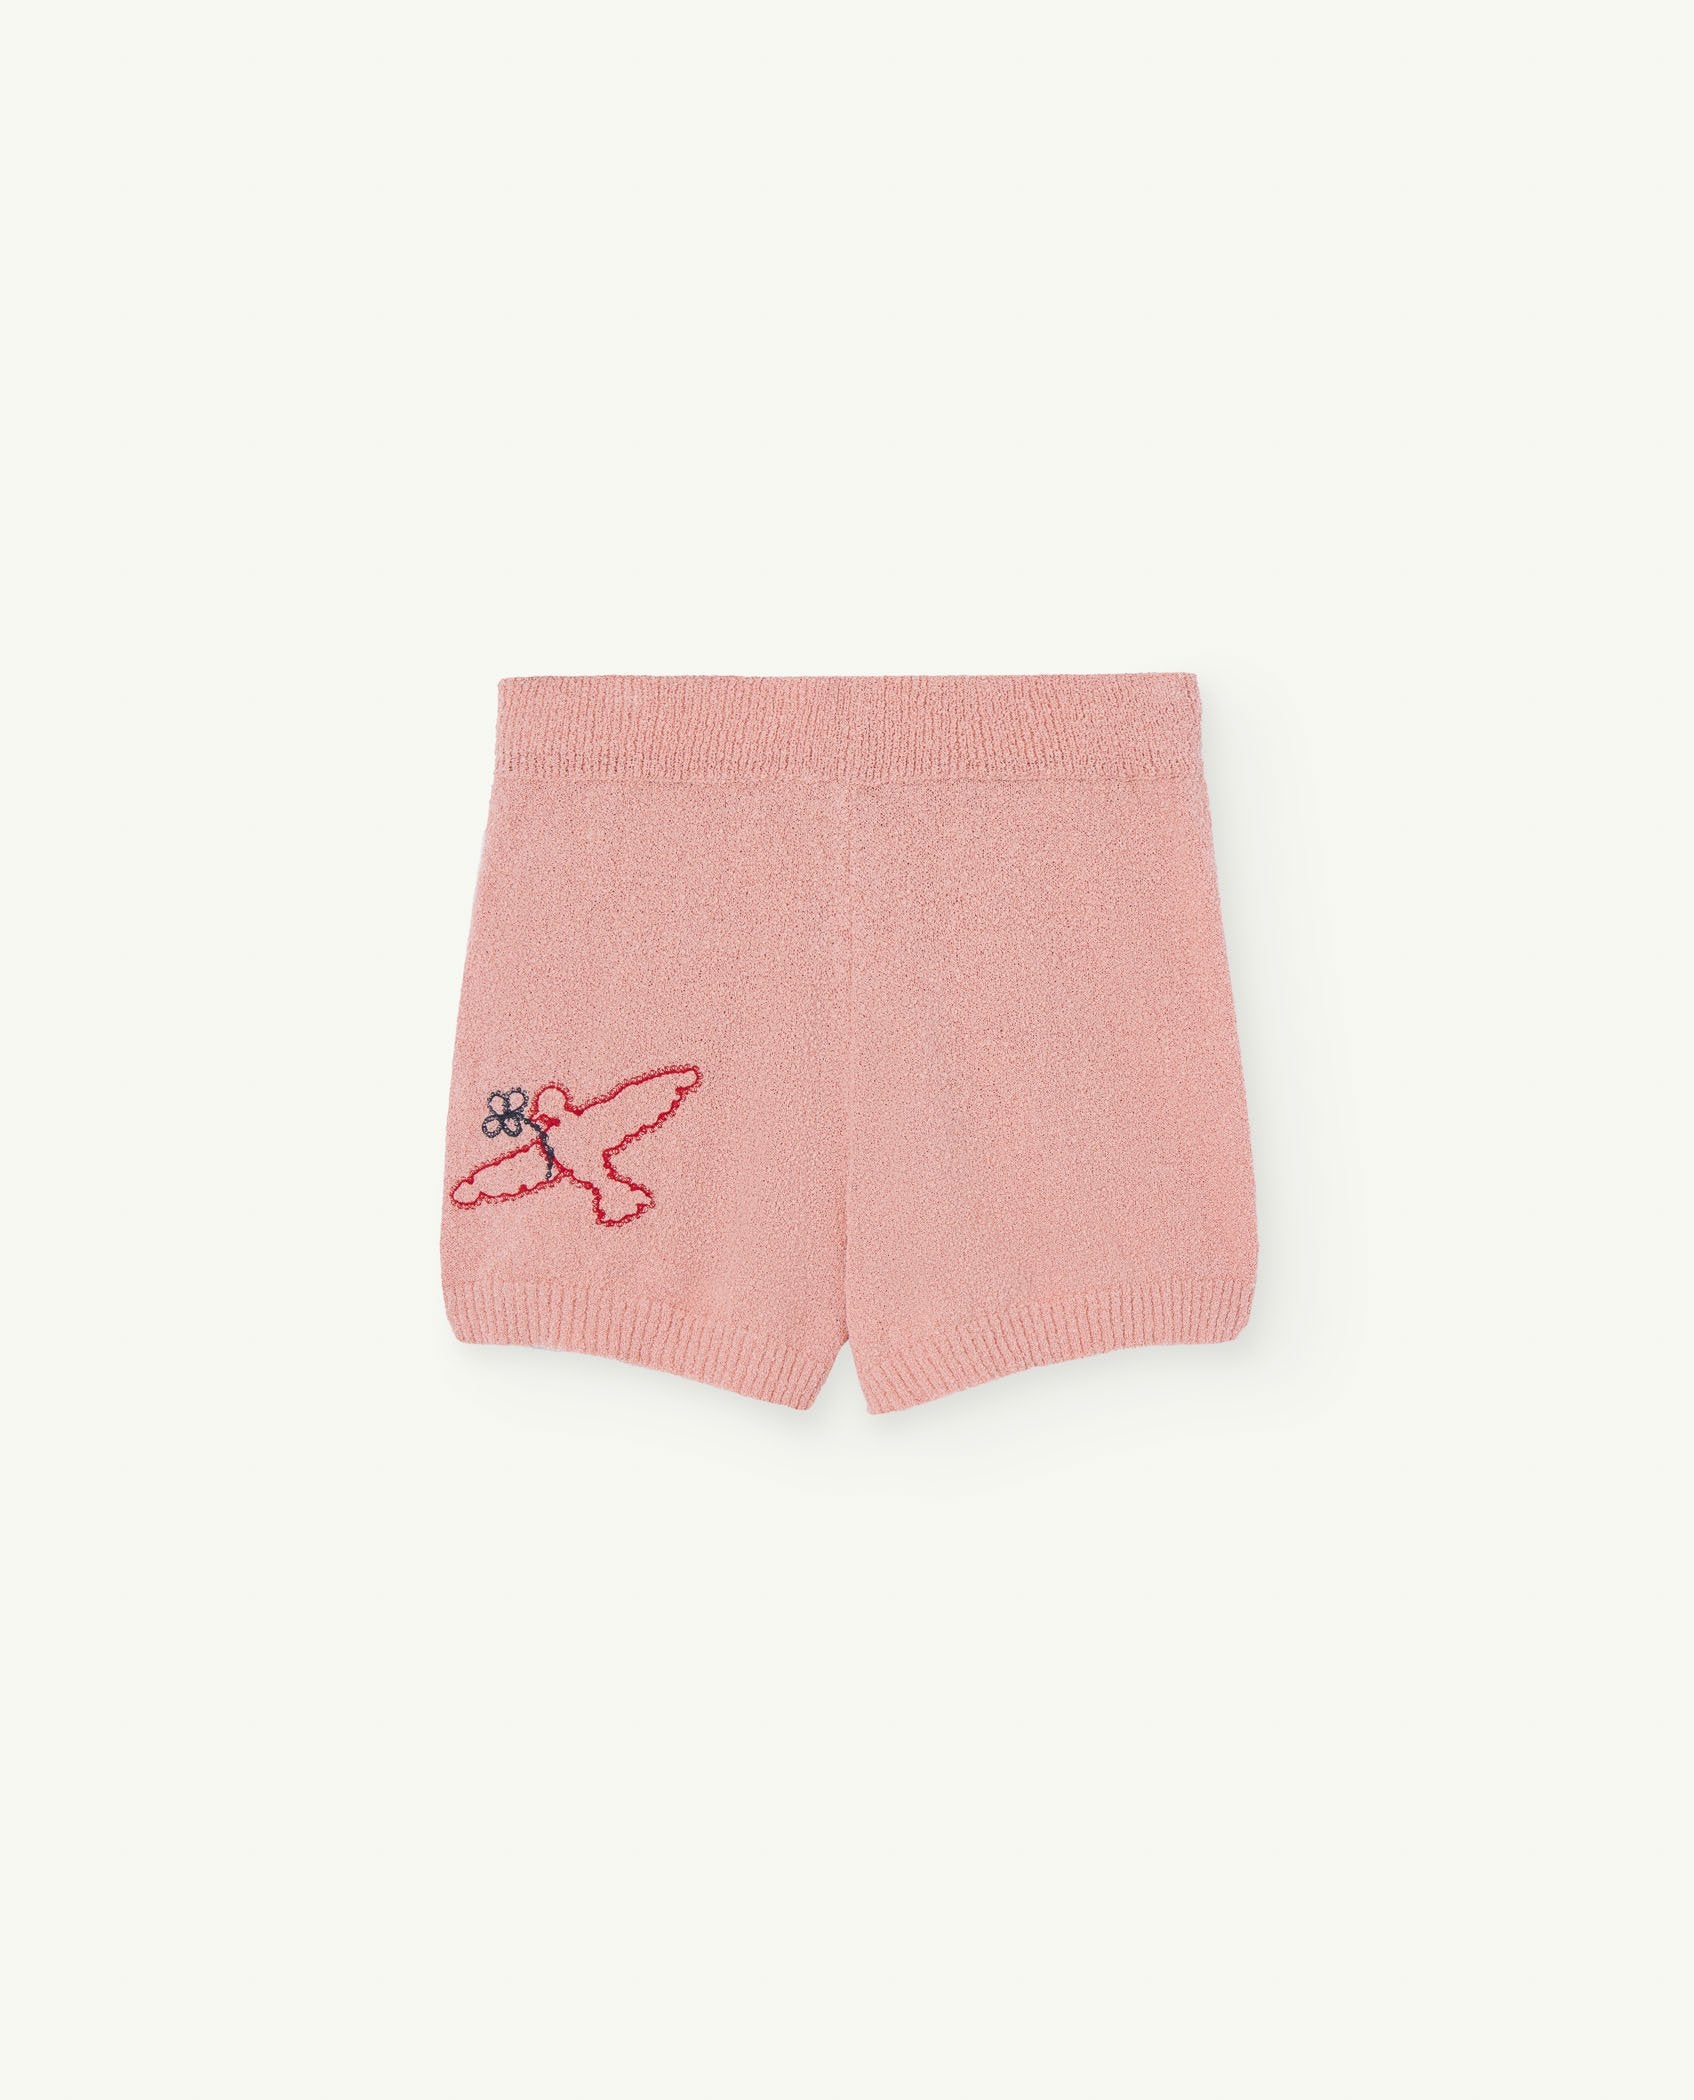 Soft Pink Opossum Shorts PRODUCT FRONT